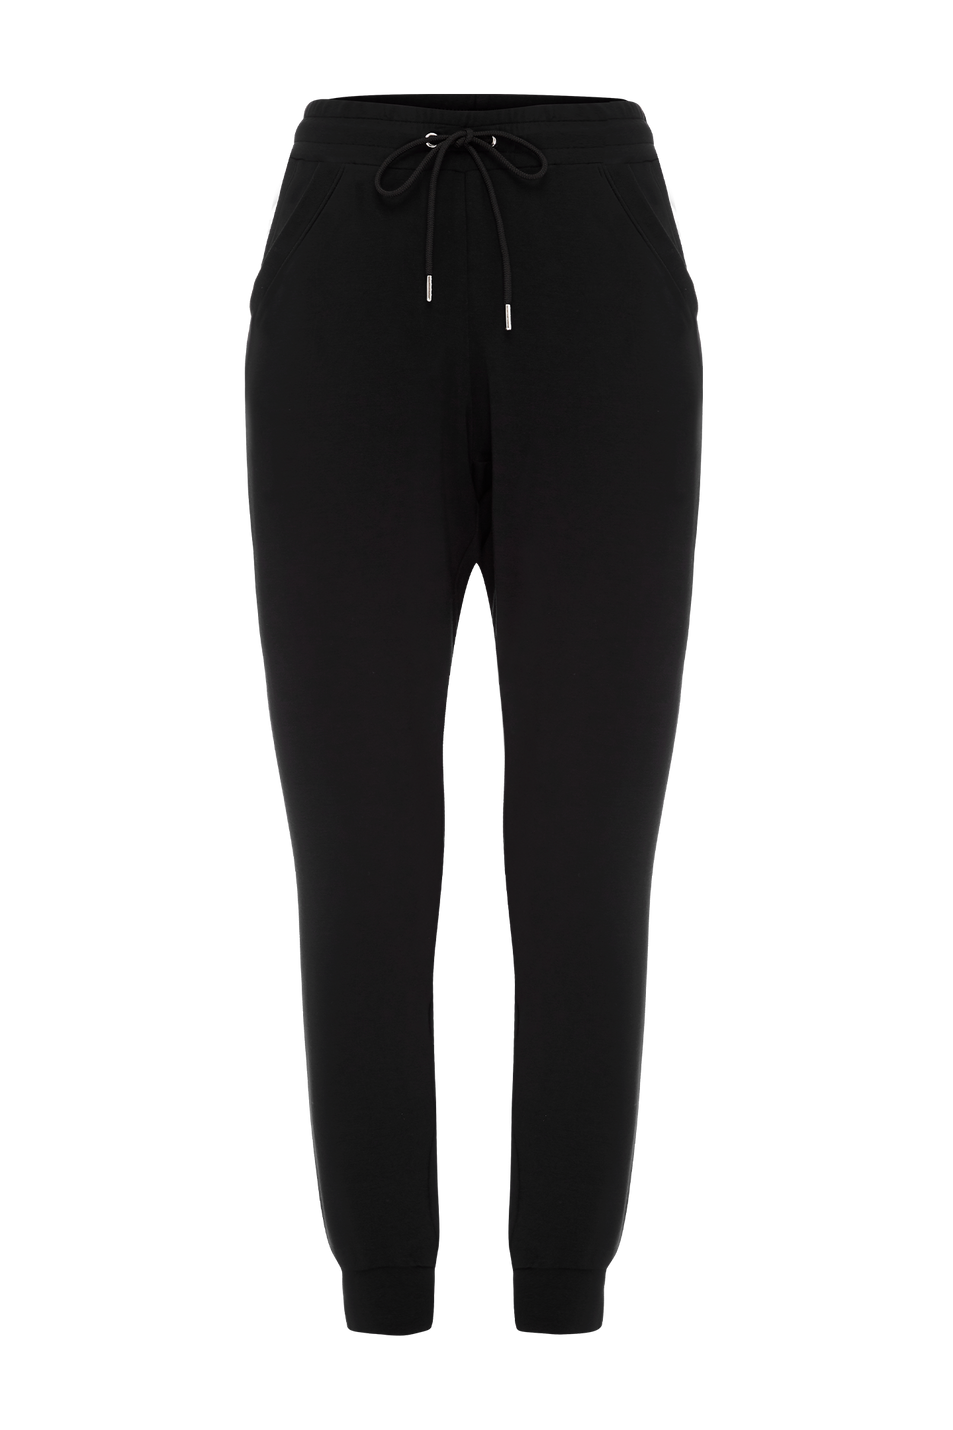 Buy ATHLEISURE PANT online at Intimo